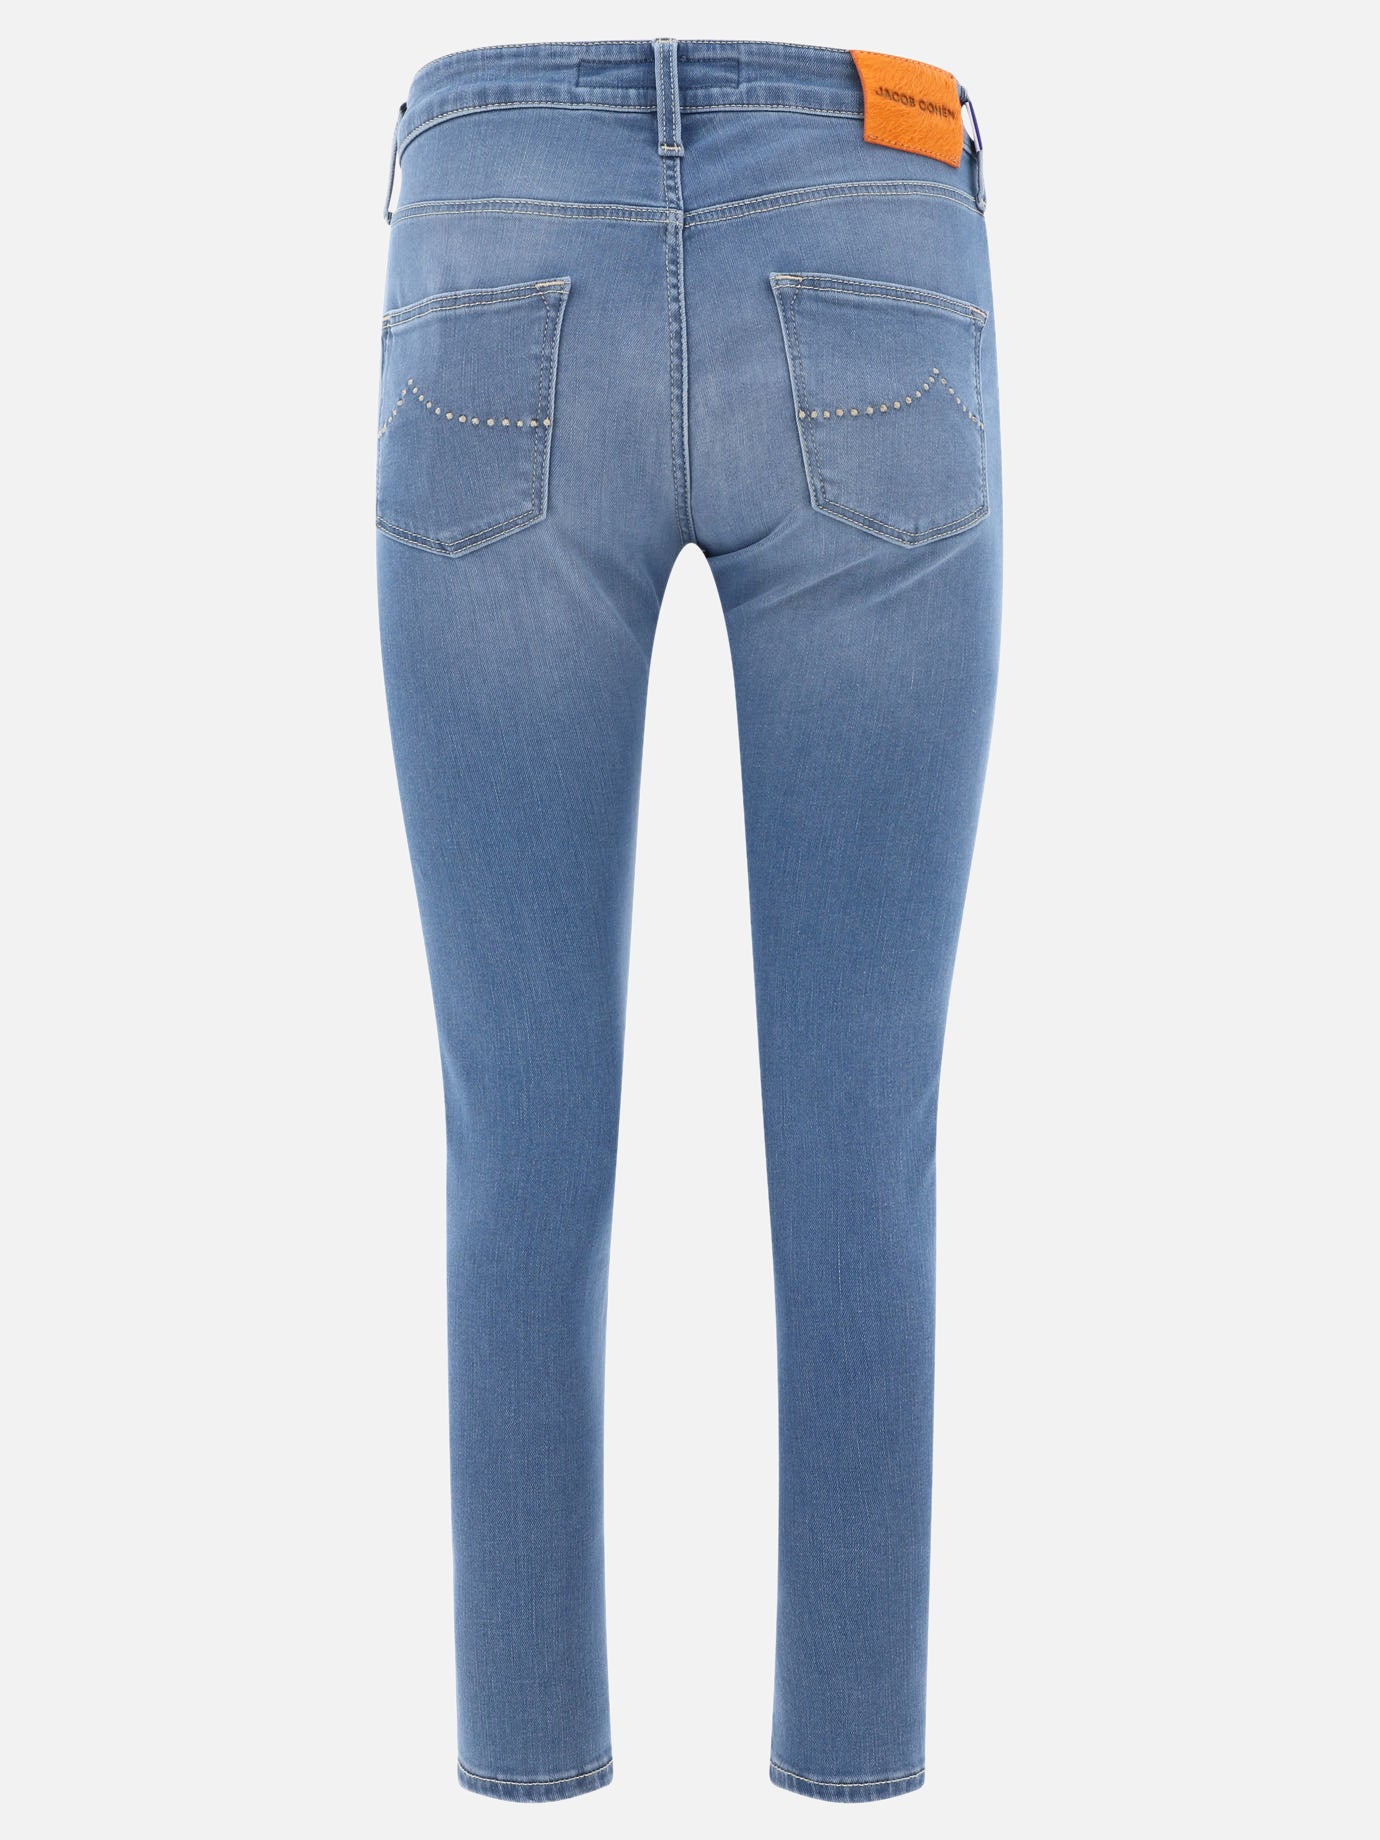 "Kimberly Cropped" jeans